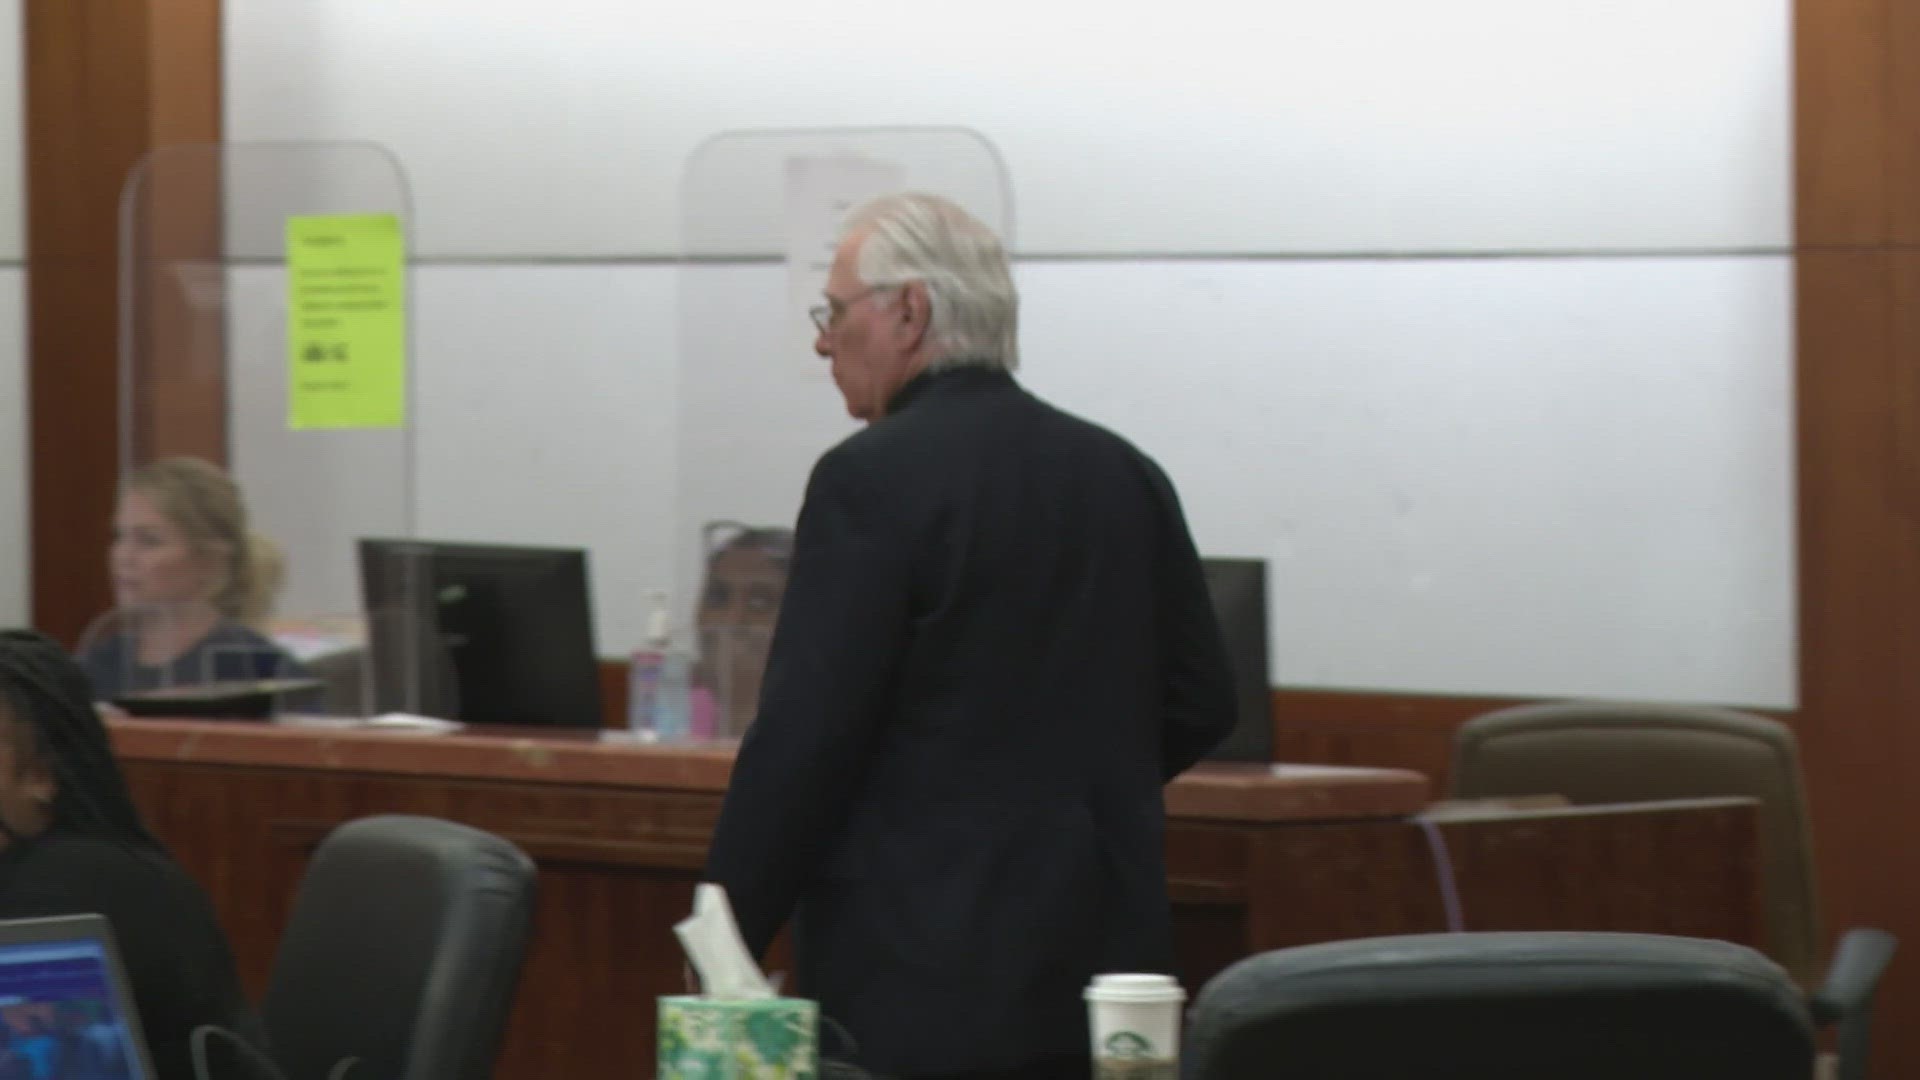 72-year-old Royal Lovejoy appeared before a judge Thursday morning.